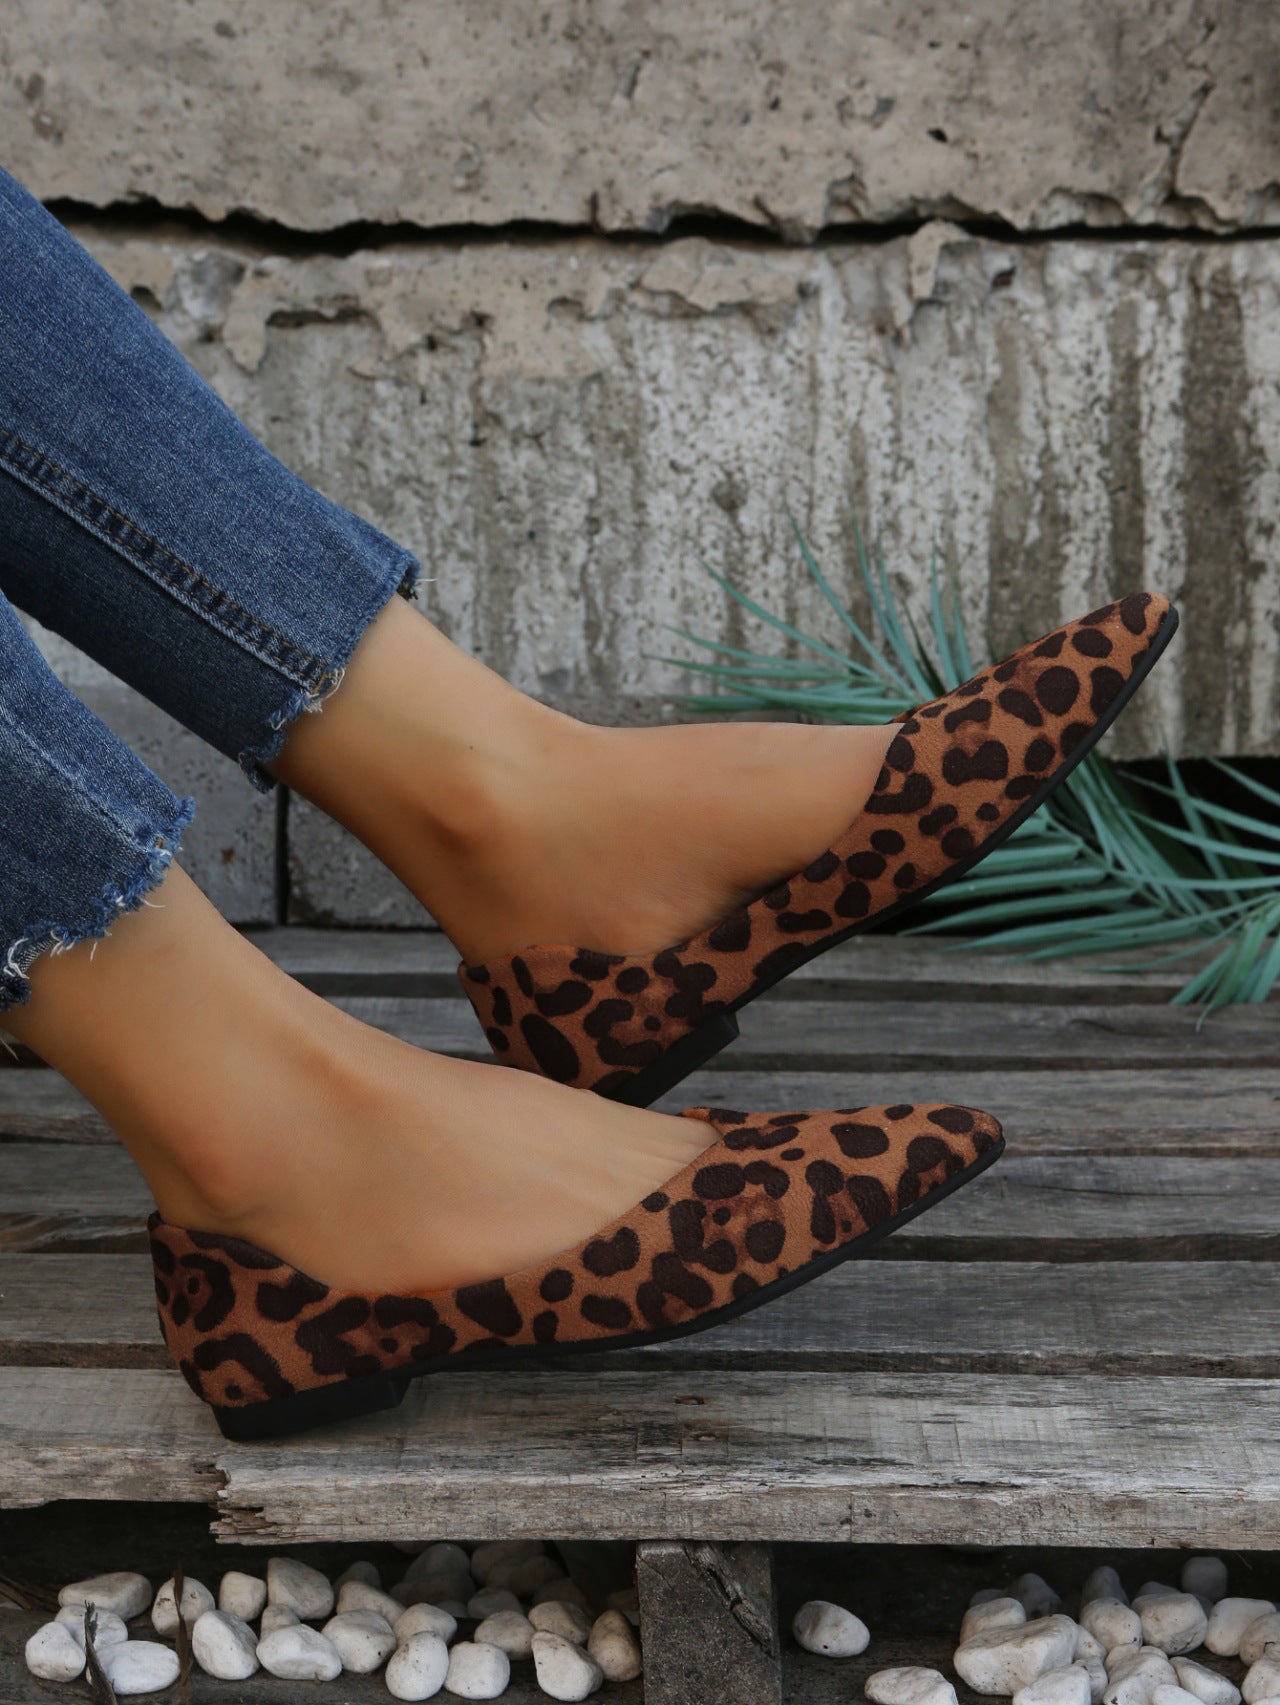 Leopard Printed Pearl Plus Size Women's Suede Flat Shoes with Low-Cut Design